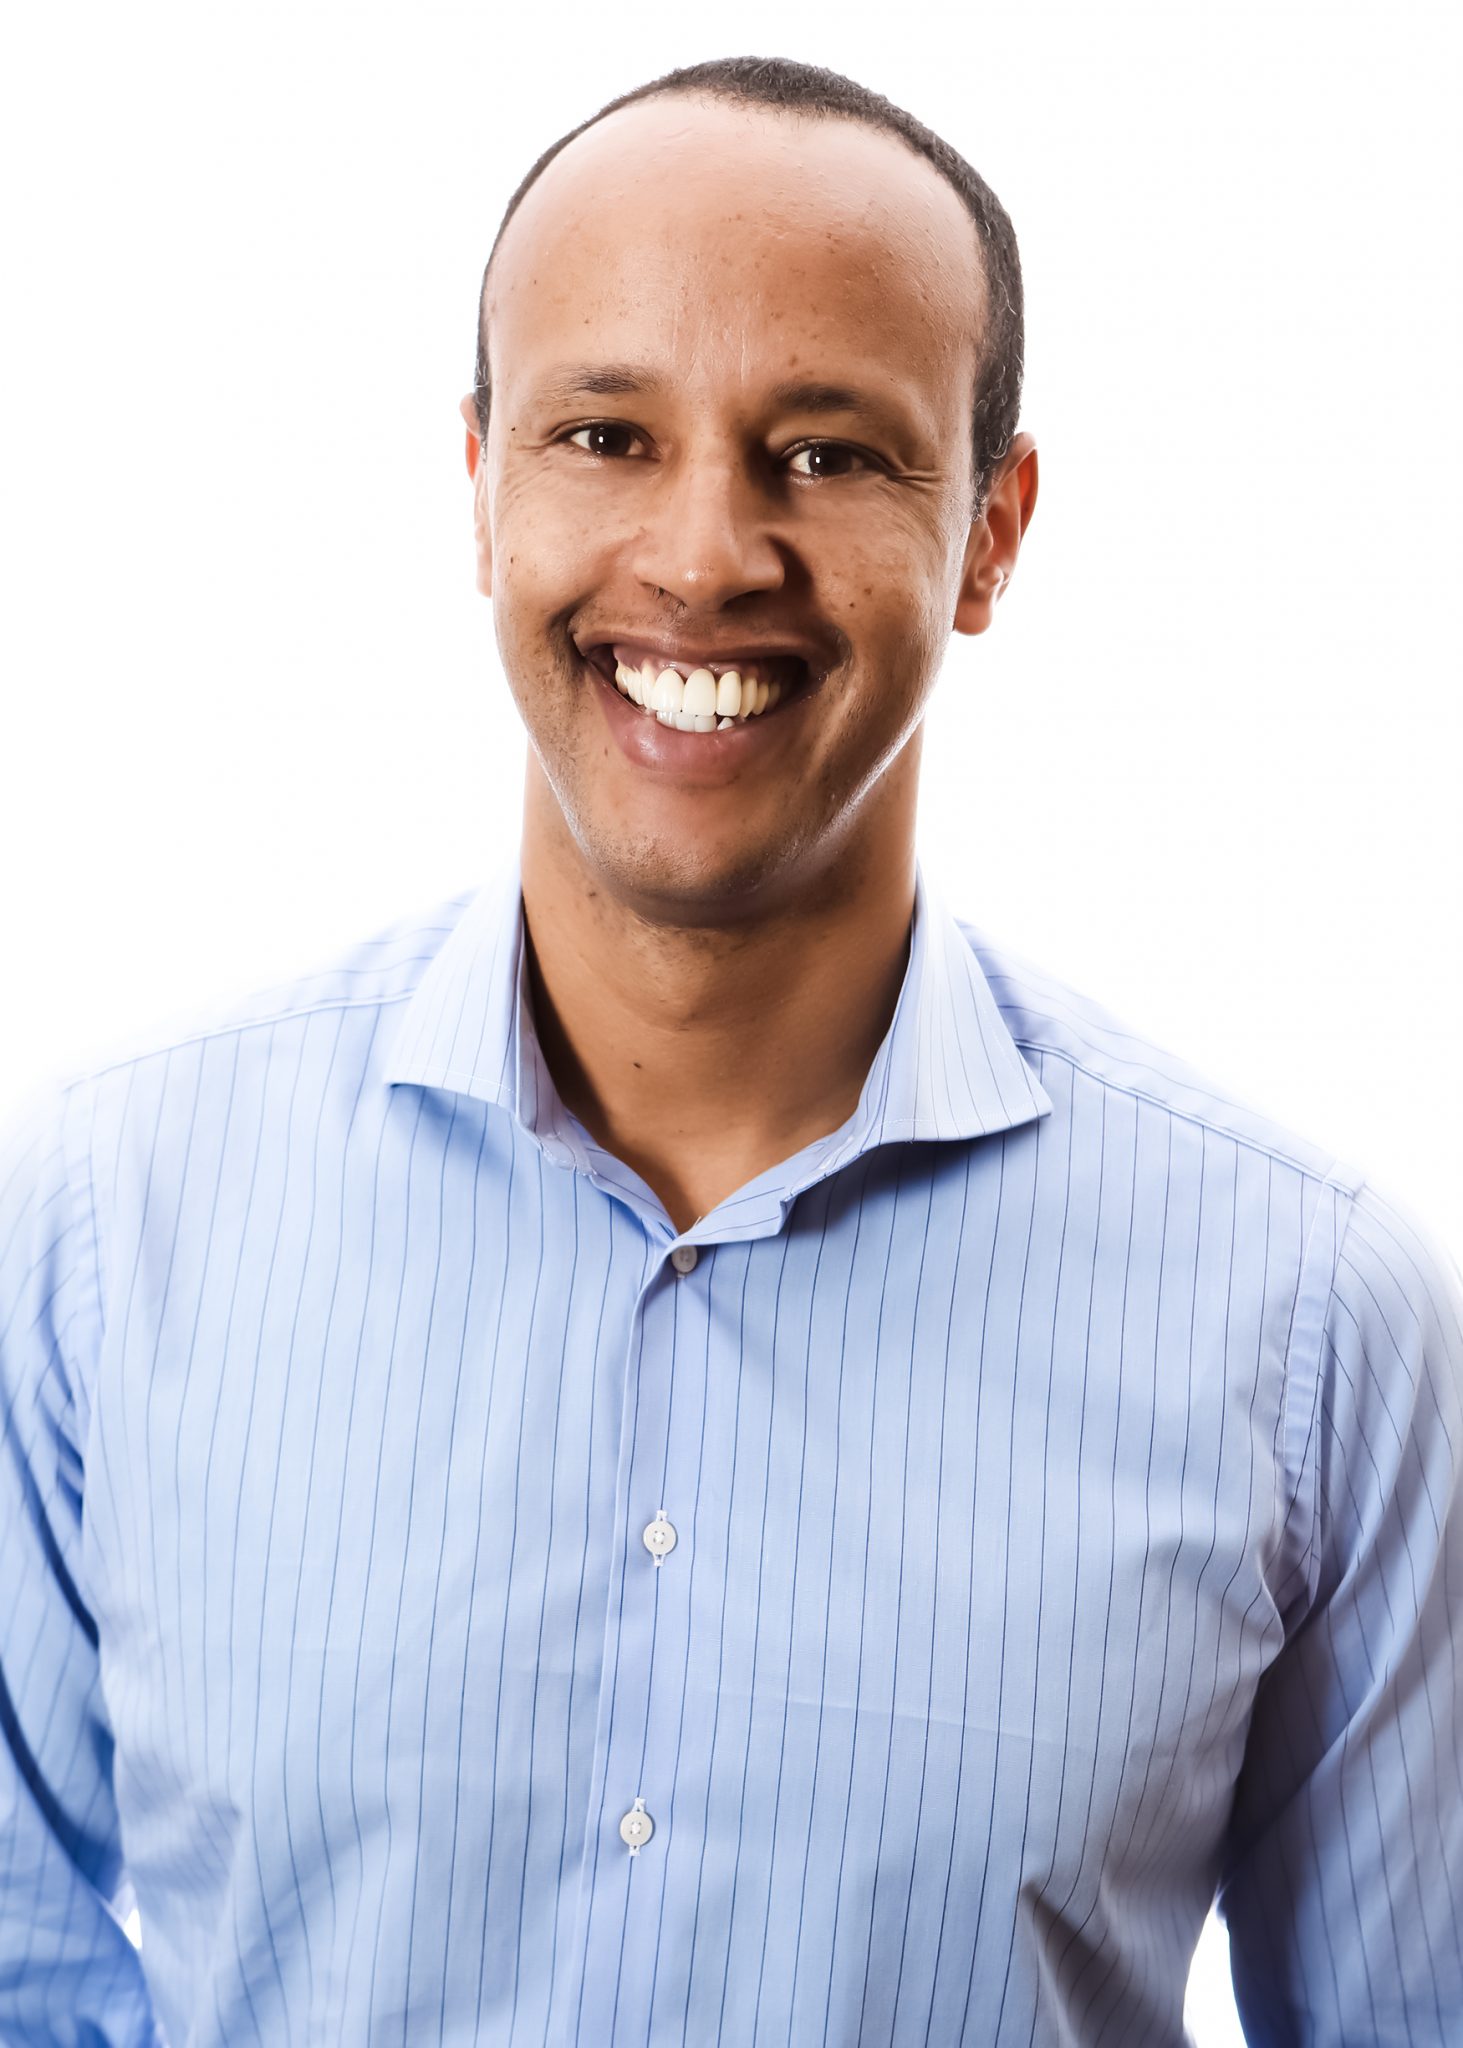 Sebuh Haileleul, Country General Manager, Microsoft East Africa